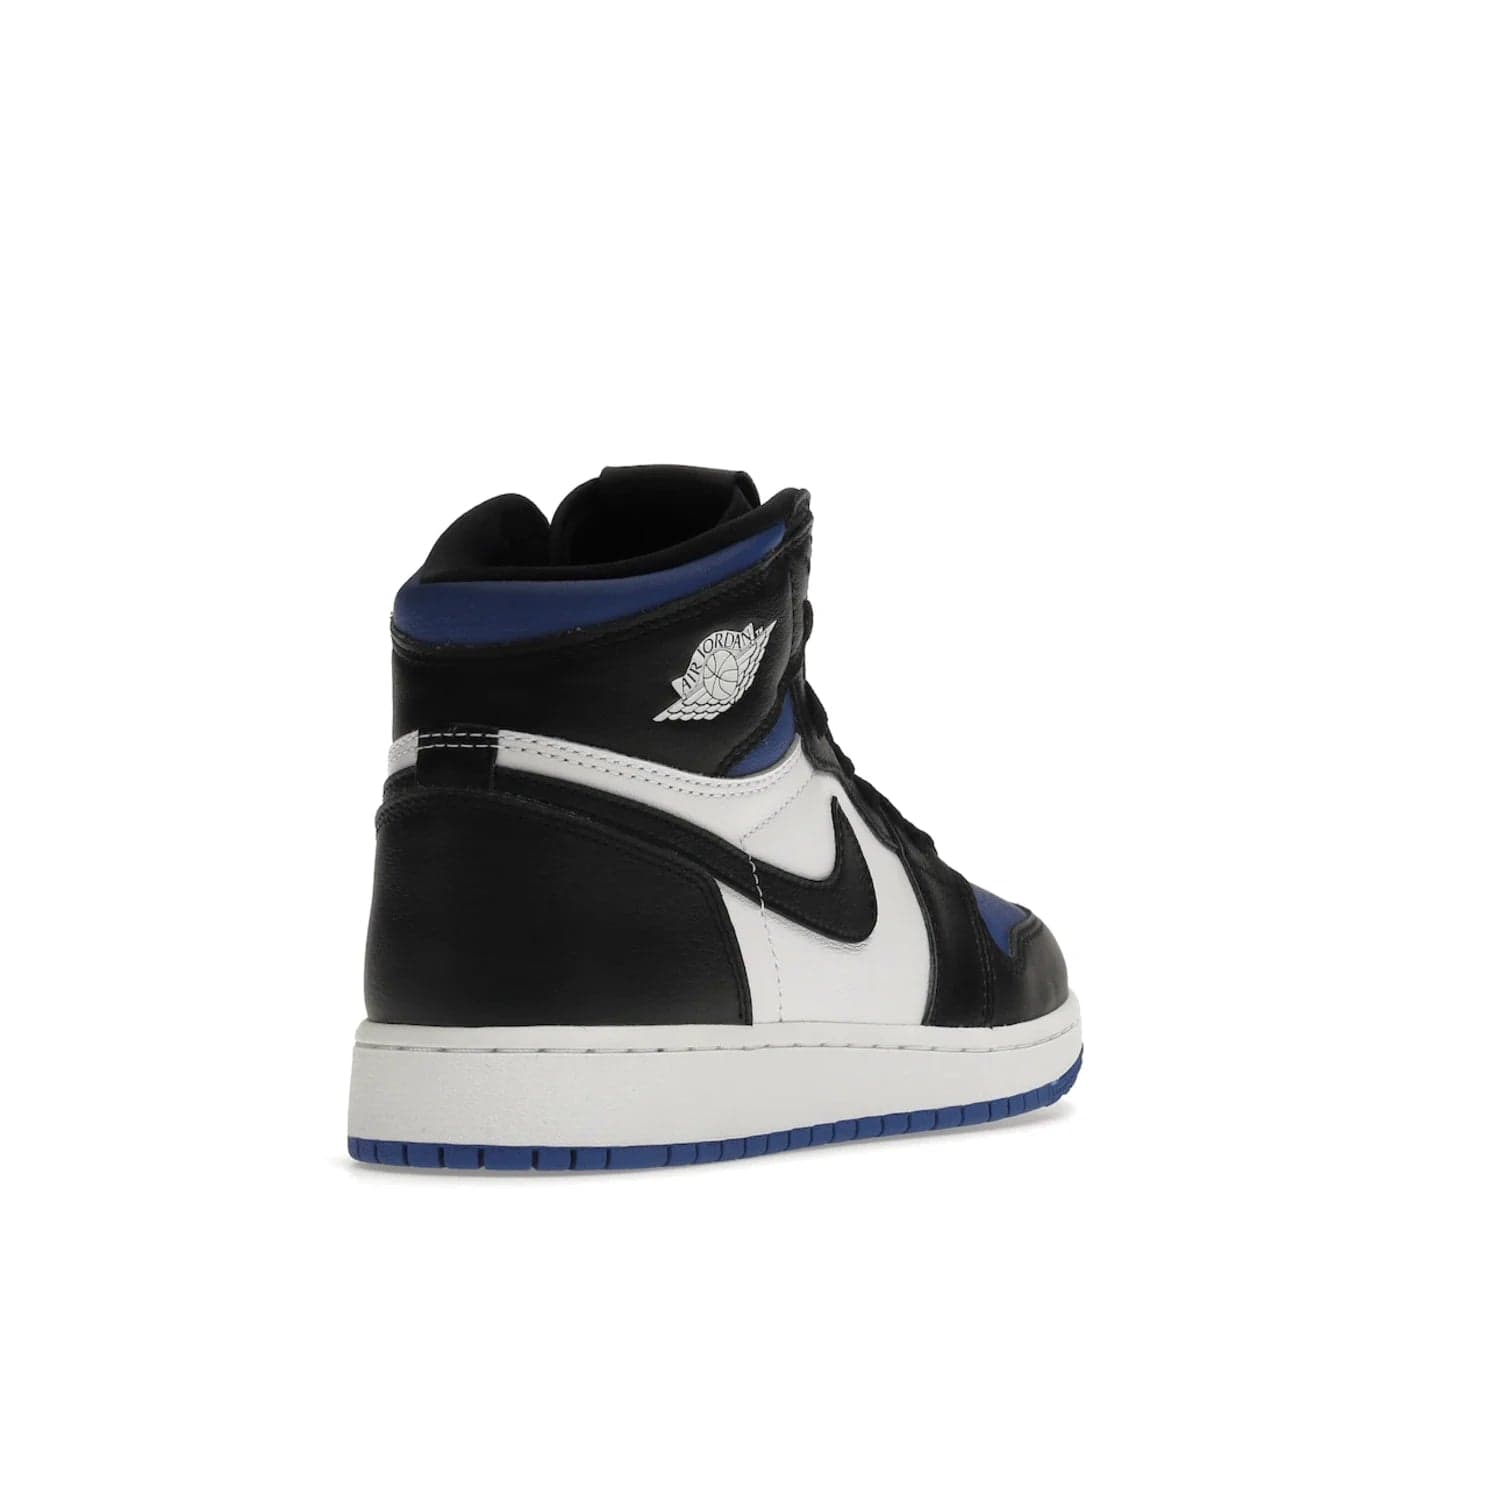 Jordan 1 Retro High Royal Toe (GS) - Image 31 - Only at www.BallersClubKickz.com - Take your sneaker wardrobe to the next level with the Jordan 1 Retro High Royal Toe (GS). Combining classic design with a luxurious white and royal blue leather upper, a textured black Swoosh and a tapered outsole. Stand out with the Air Jordan Wings logo near the heel.